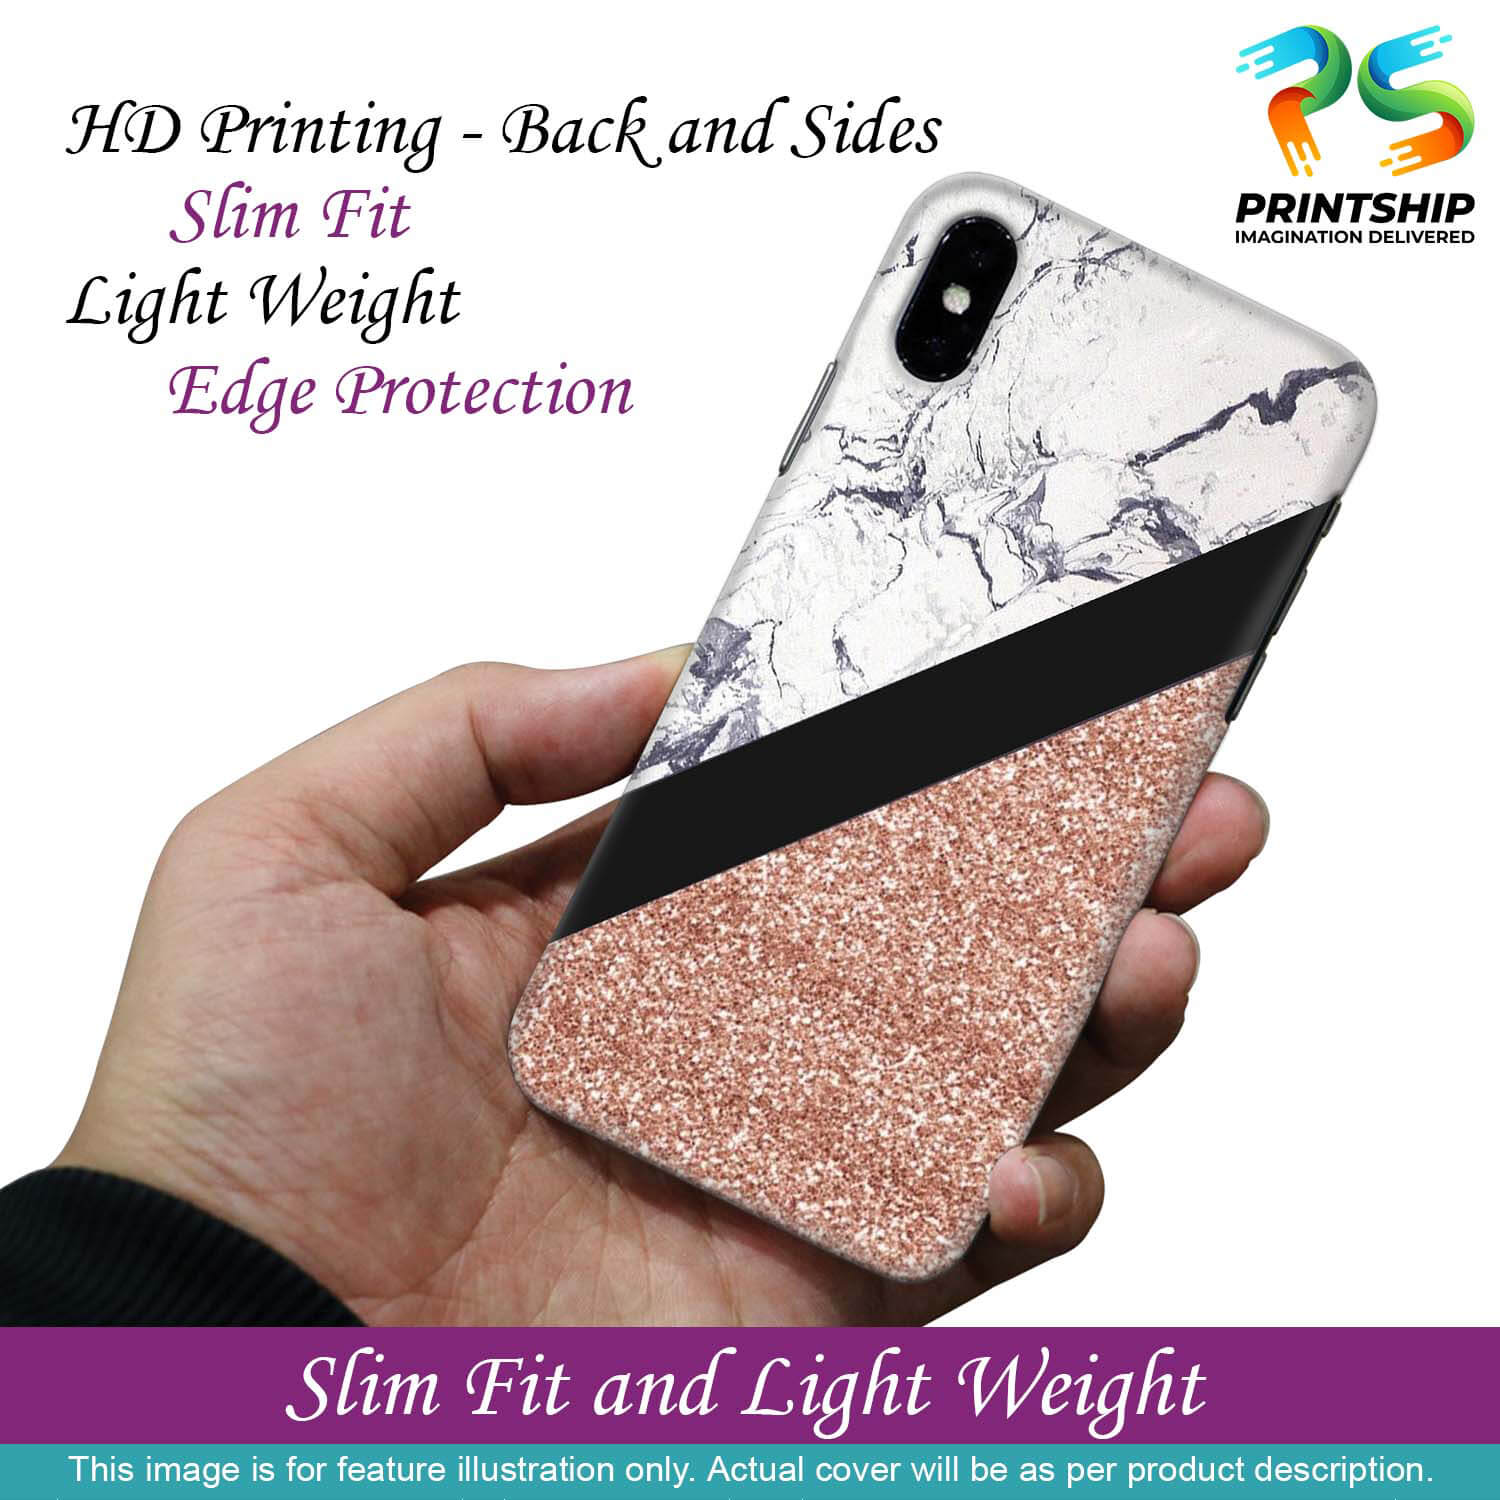 PS1331-Marble and More Back Cover for Oppo Reno6 Pro 5G